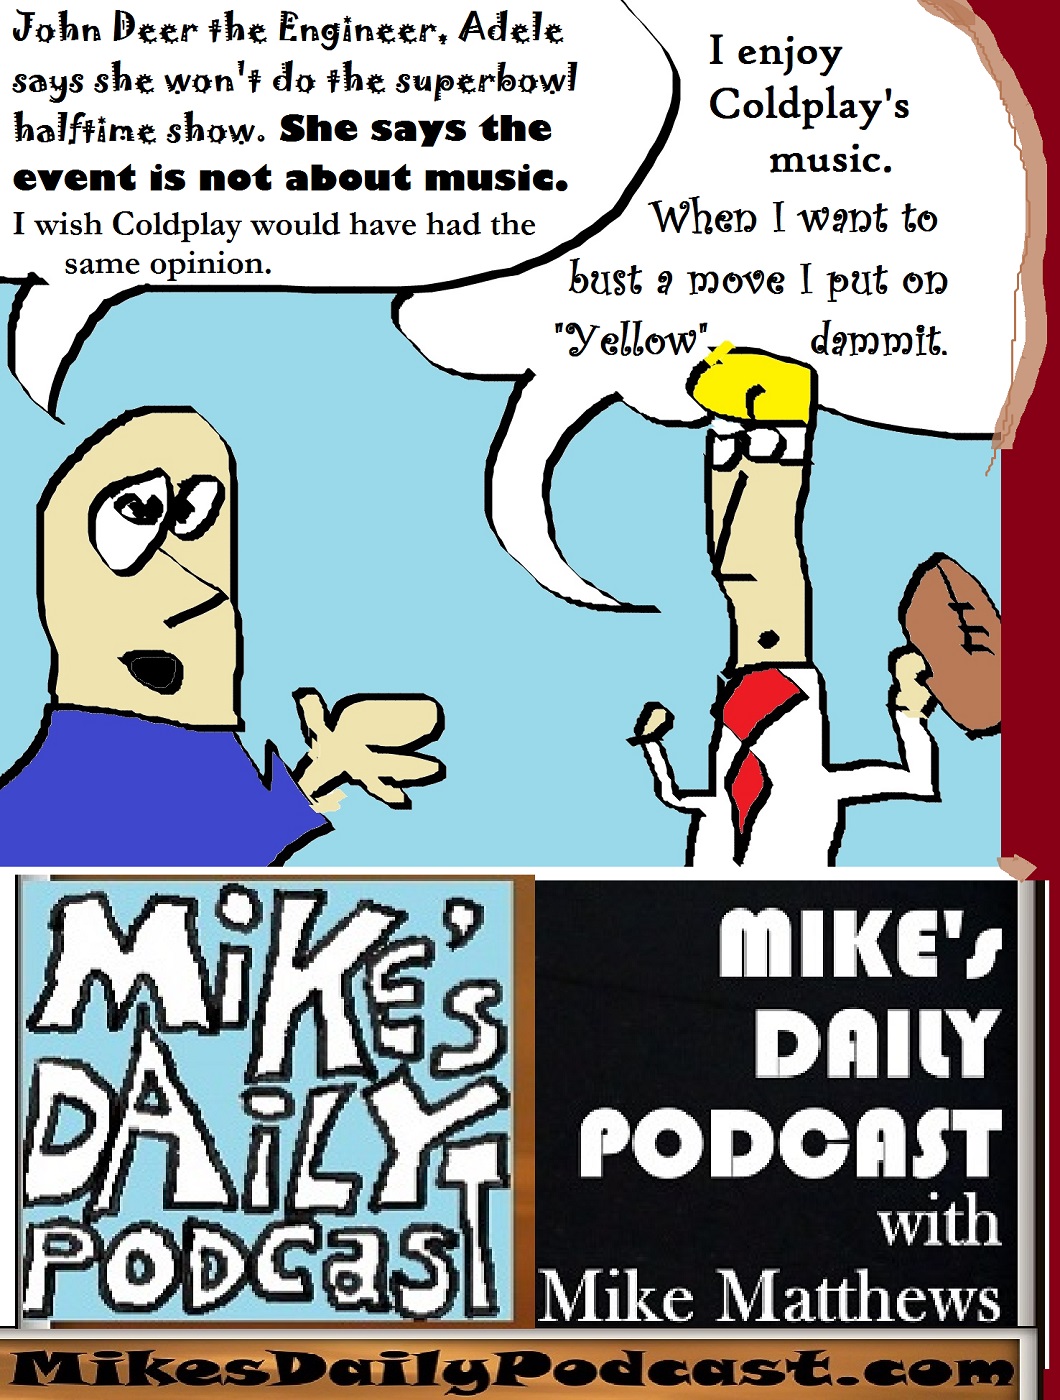 MIKEs DAILY PODCAST 1152 John Deer the Engineer football